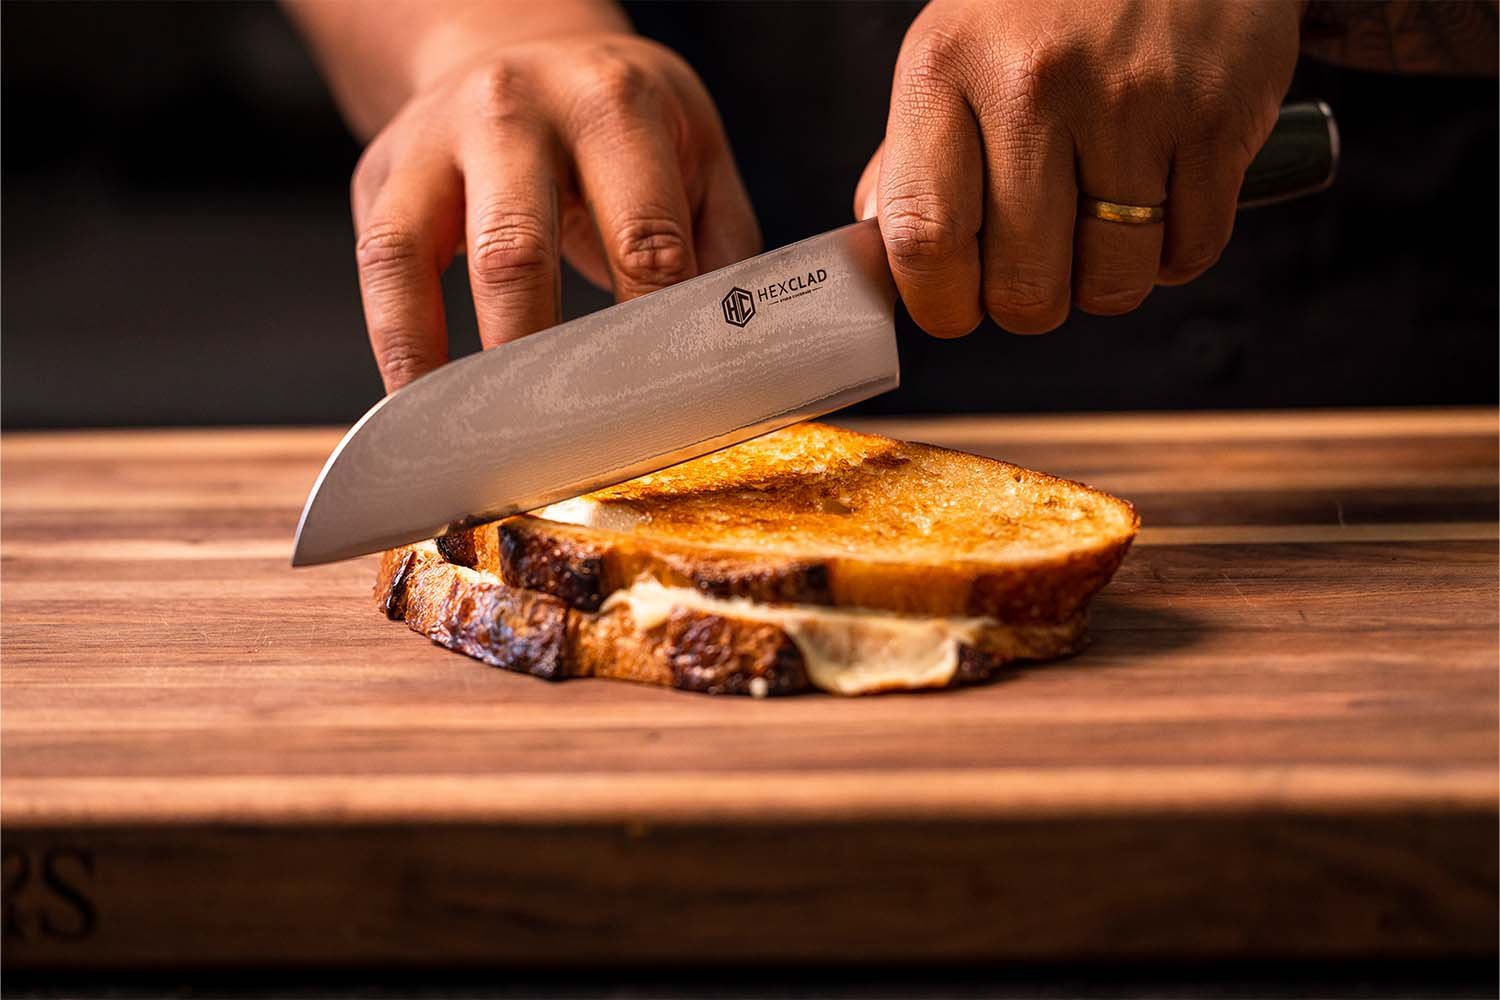 The 12 Types of Knives Every Home Chef Should Have